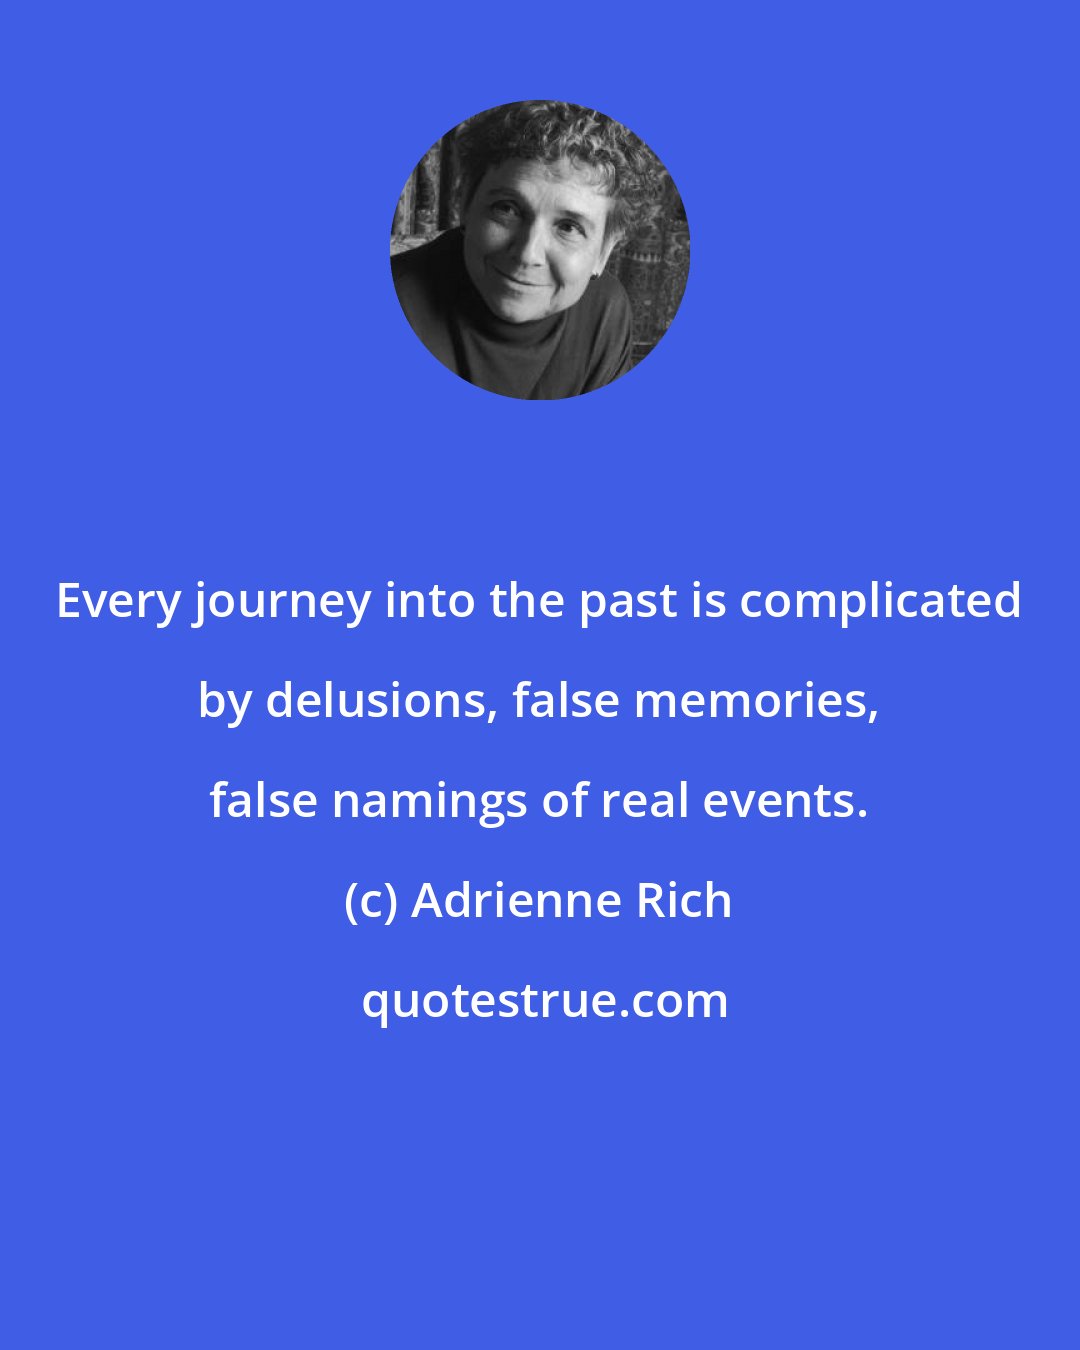 Adrienne Rich: Every journey into the past is complicated by delusions, false memories, false namings of real events.